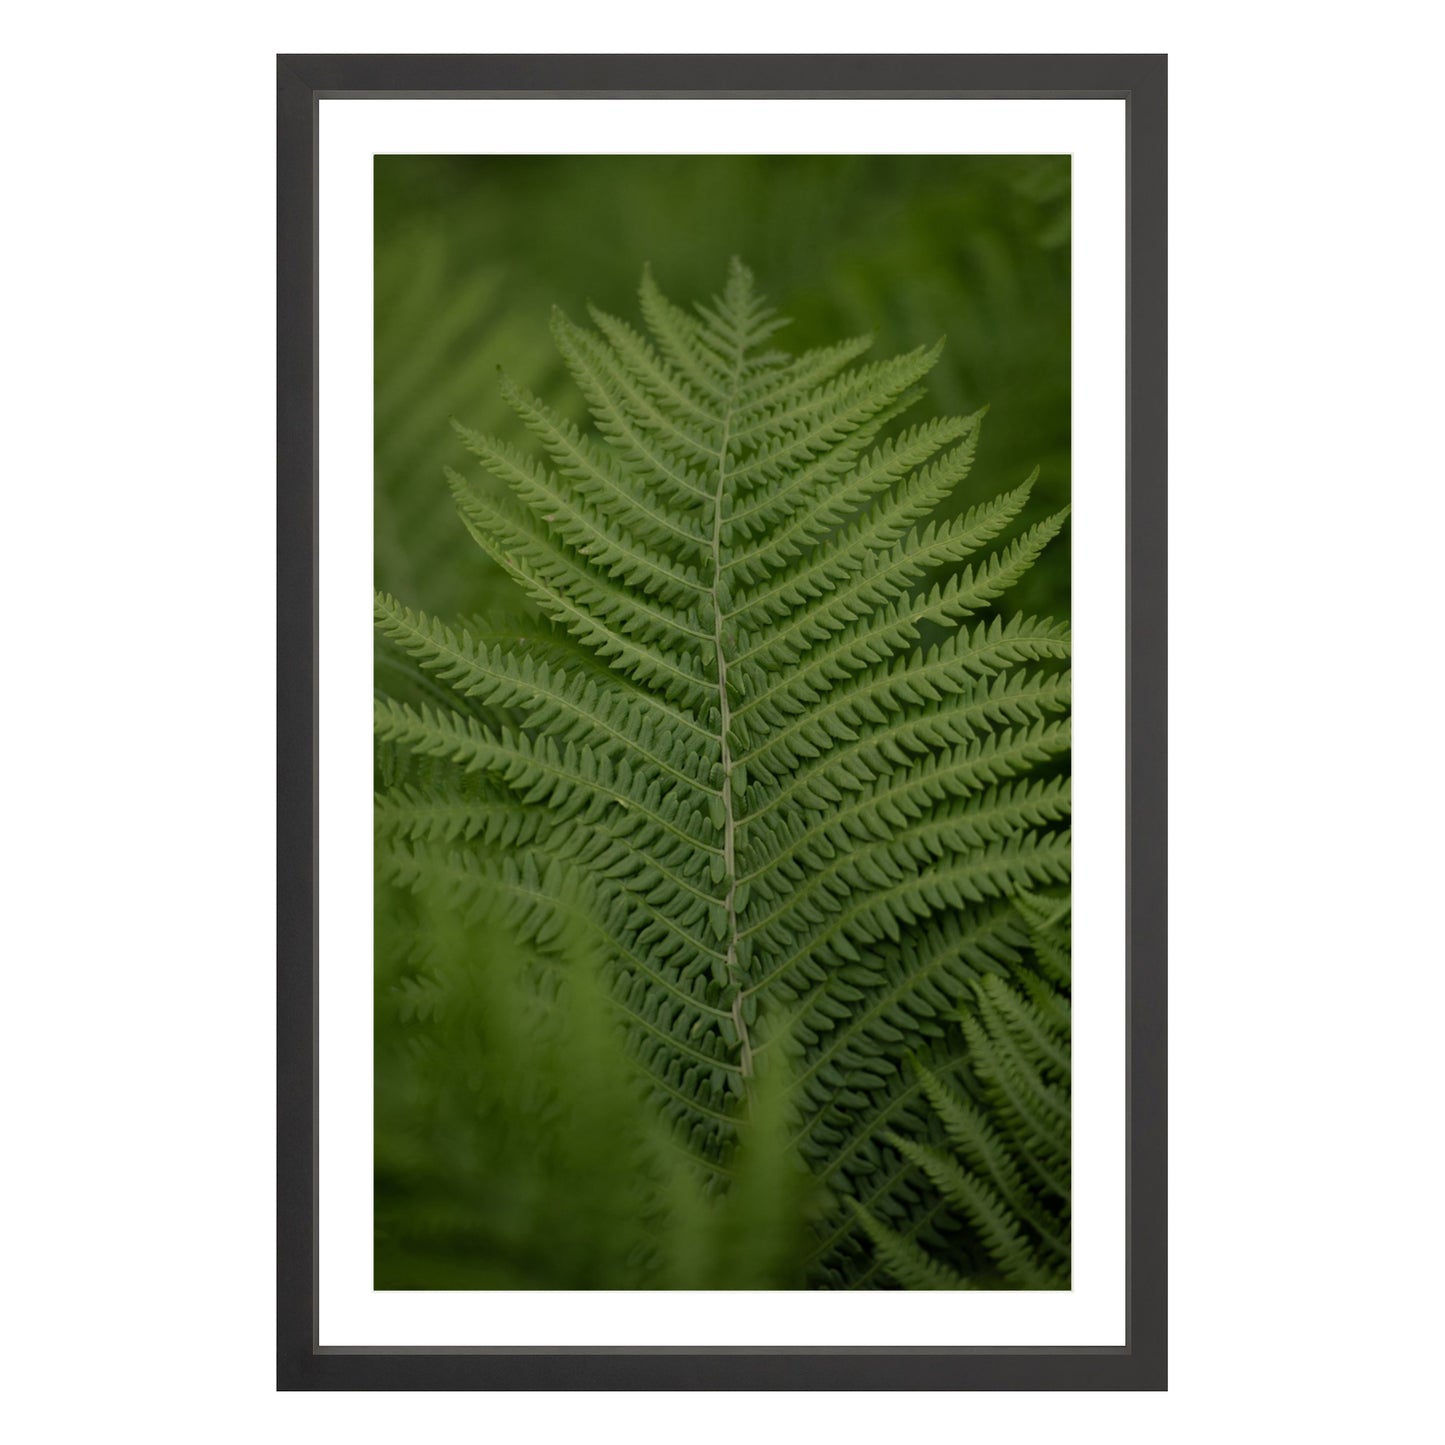 Photograph of green fern leaf framed in black with white mat